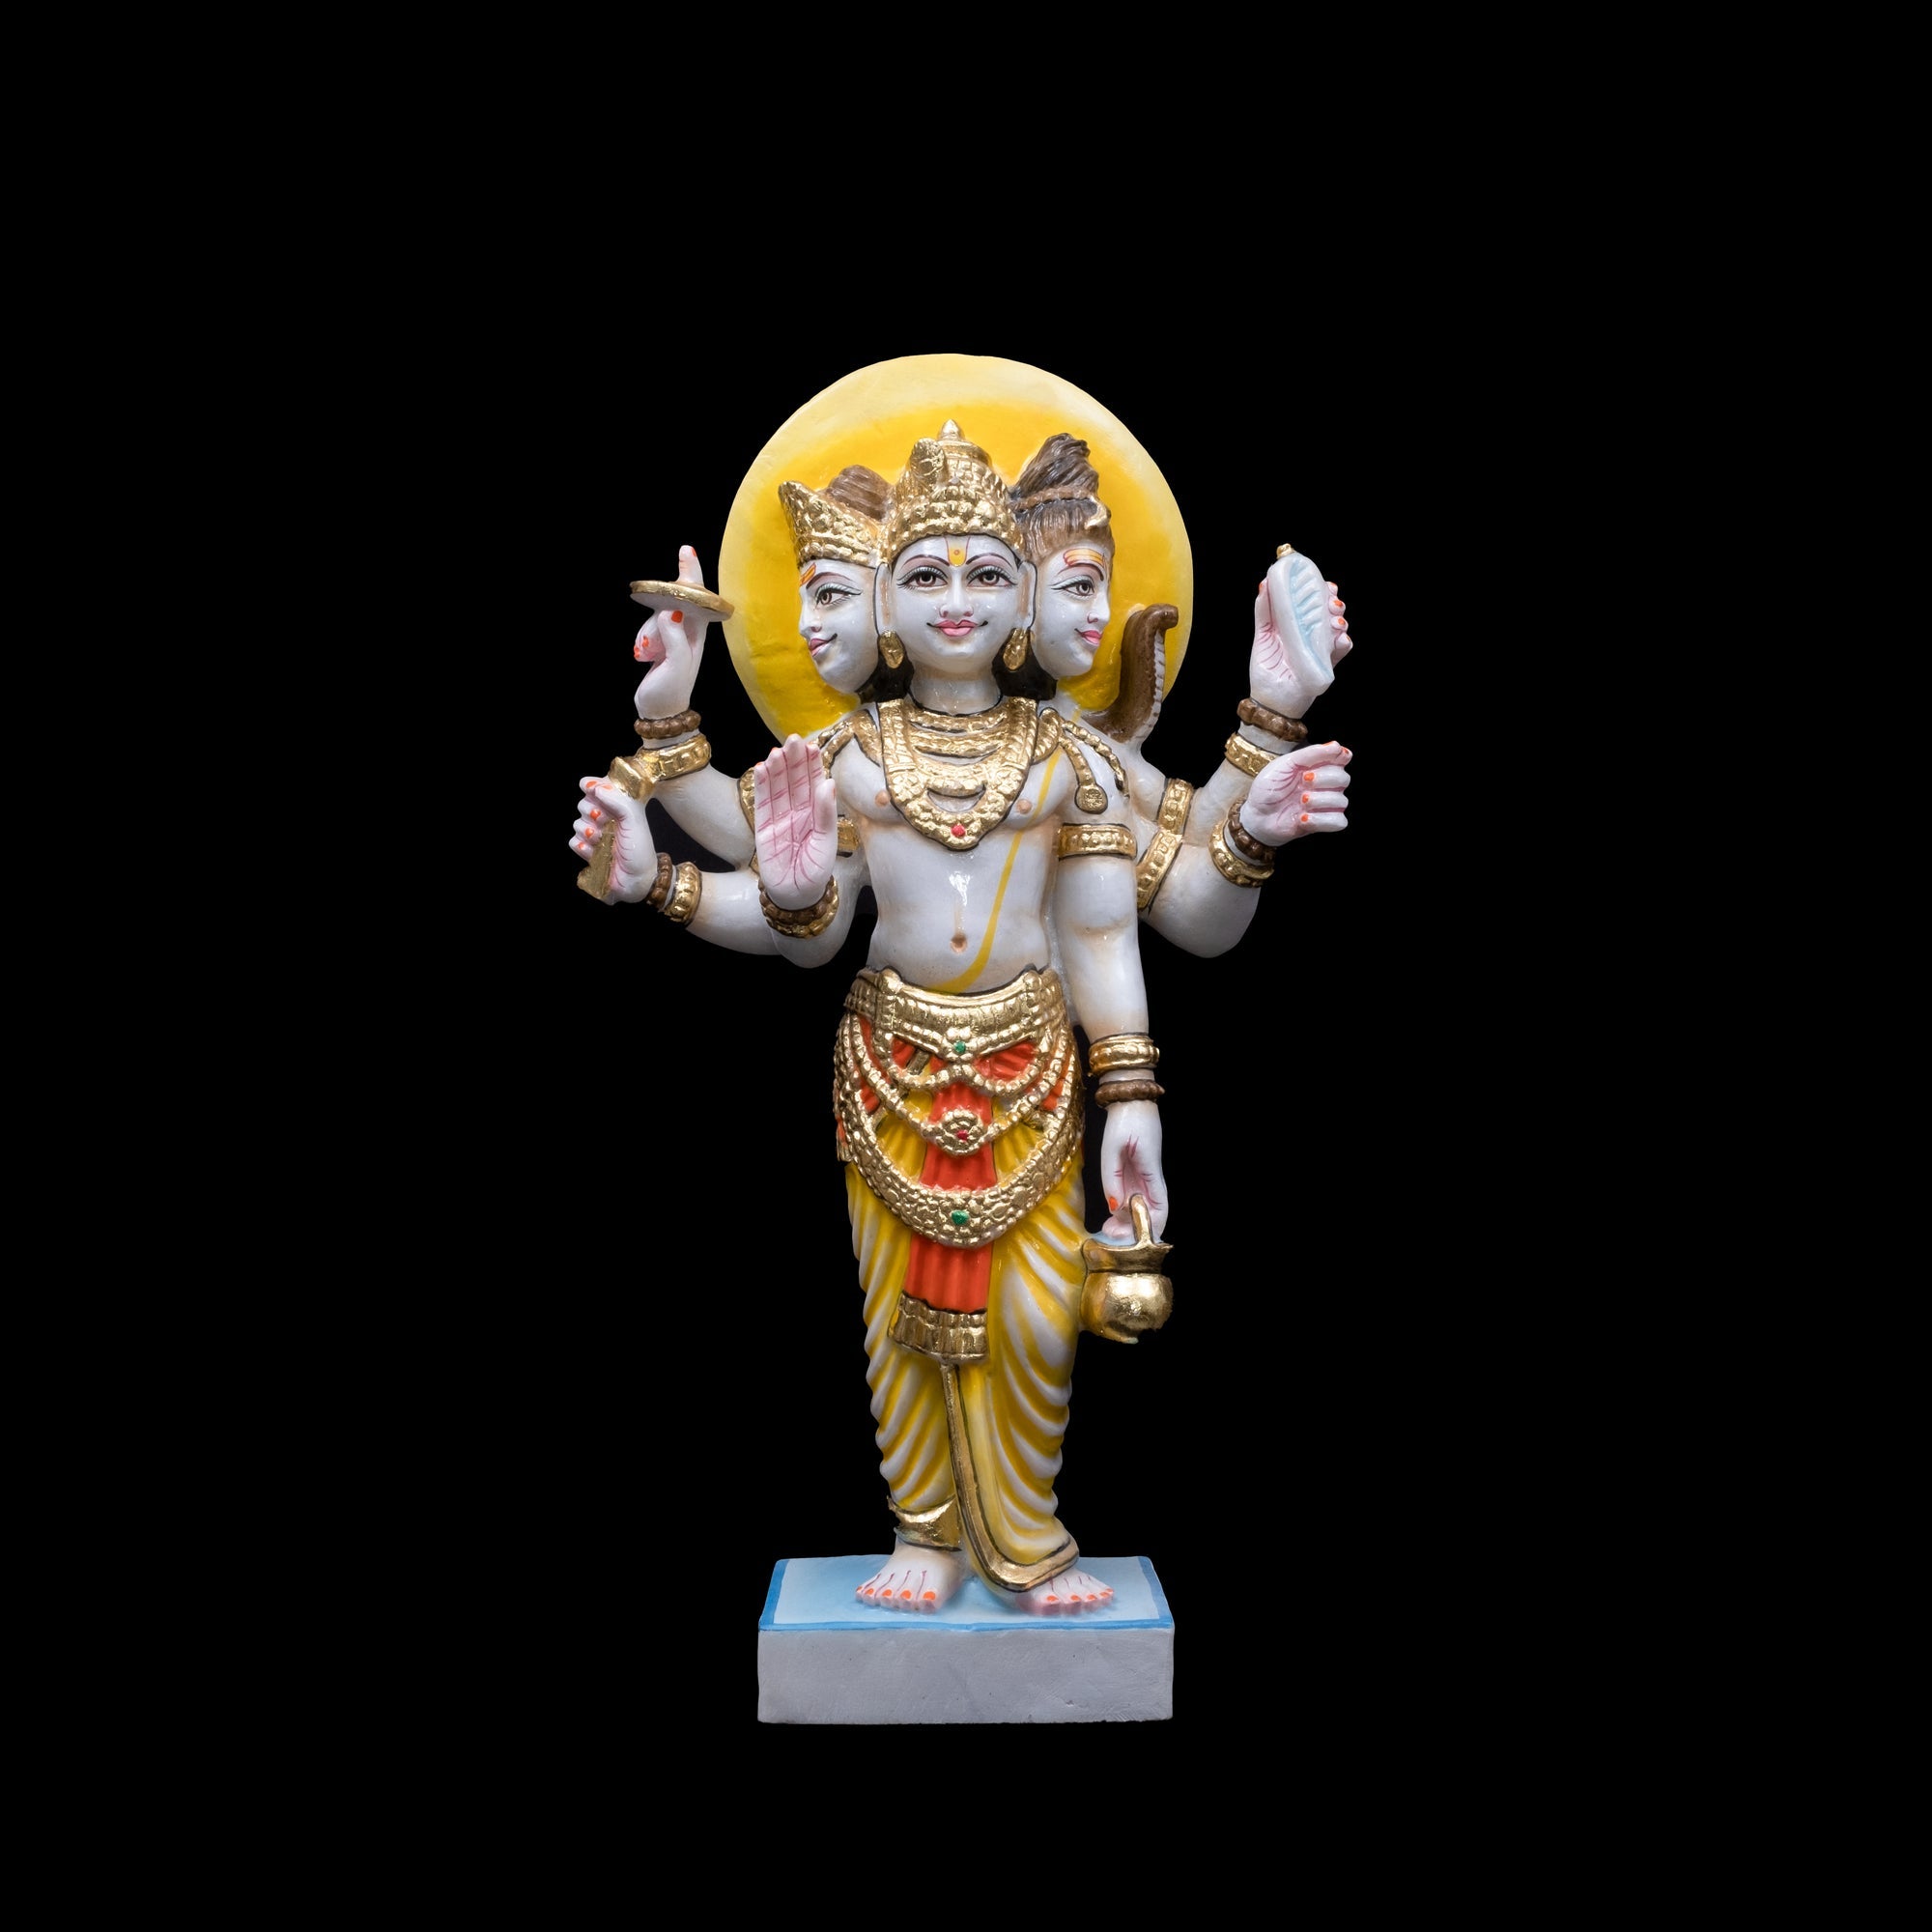 Brahma Standing Marble Statue For Home Temple - 24 x 15 x 5 inches